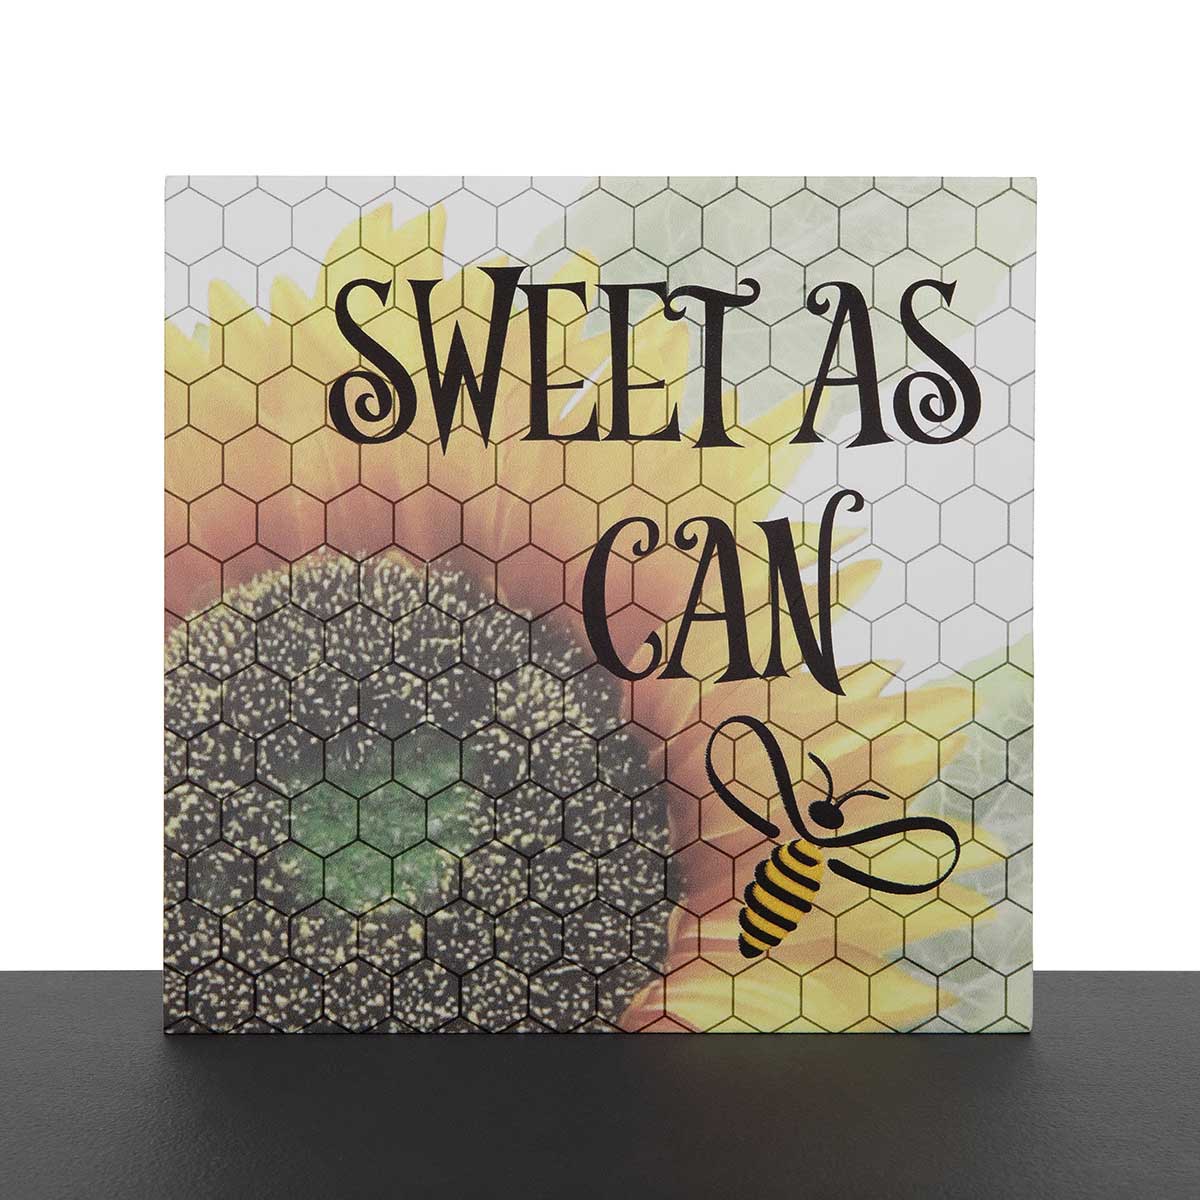 b50 SIGN SWEET AS CAN BEE 7IN X .75IN X 7IN